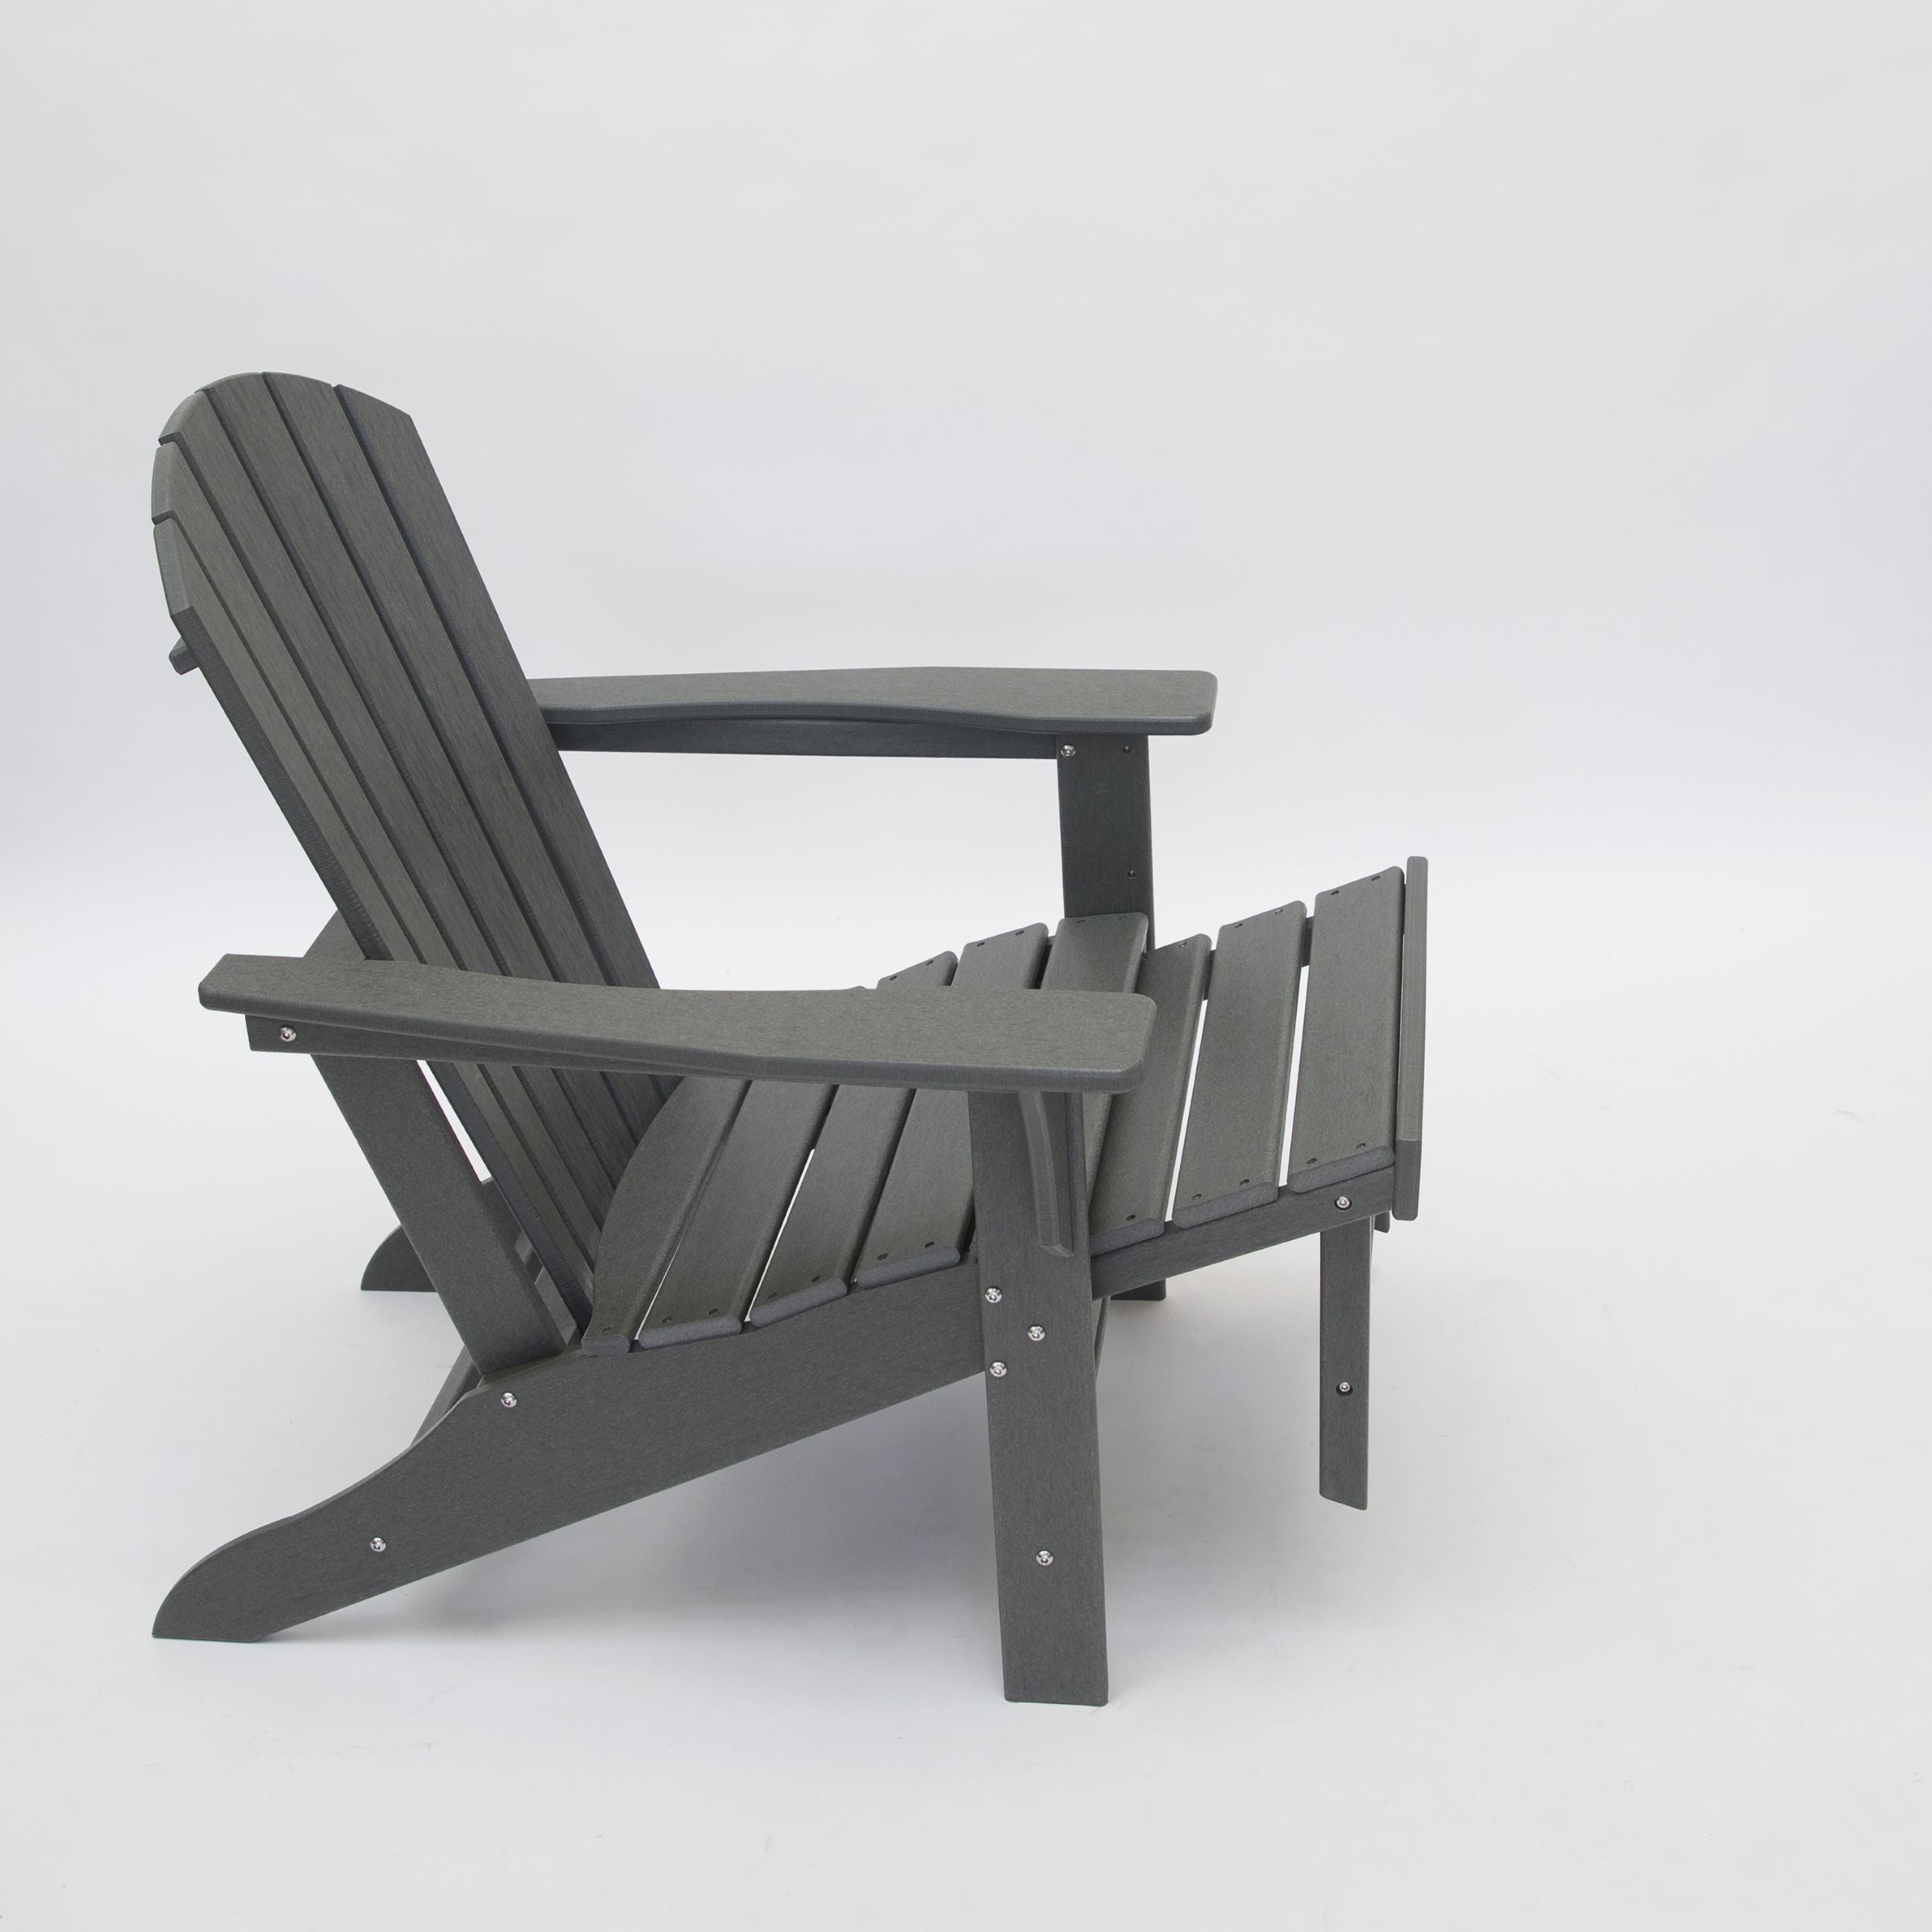 LuXeo - Hampton HDPE Recycled Plastic Outdoor Patio Adirondack Chair with Hideaway Ottoman